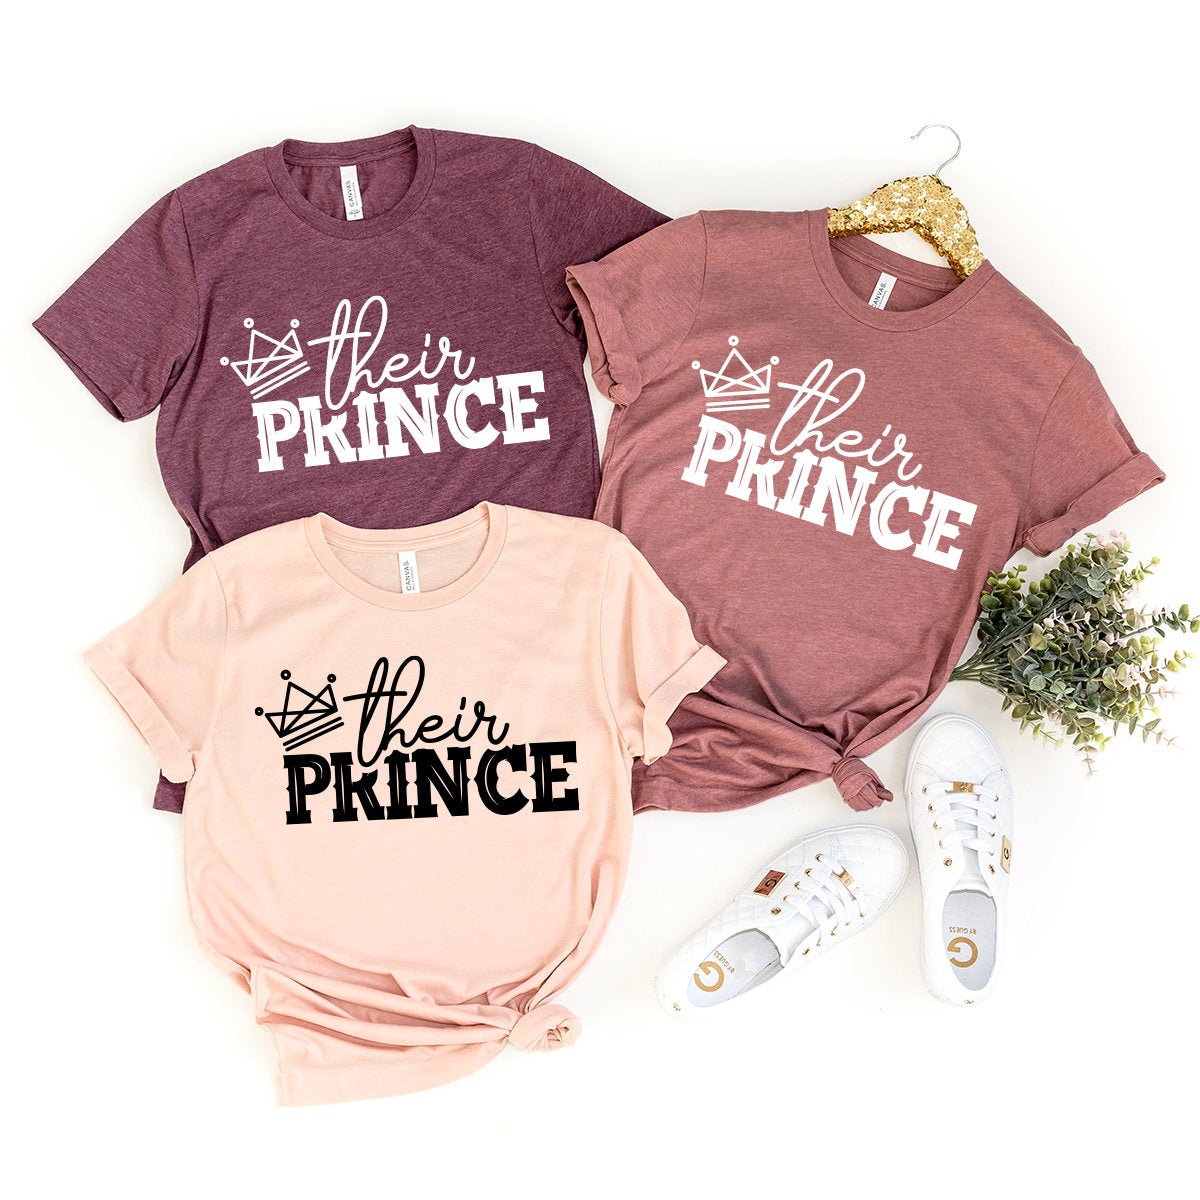 Her King His Queen Shirt, Matching Couples Tee, Wedding Party Shirt, Honeymoon Shirts, Her And His Shirt, Funny Couple Shirt, Girlfriend Tee - Fastdeliverytees.com